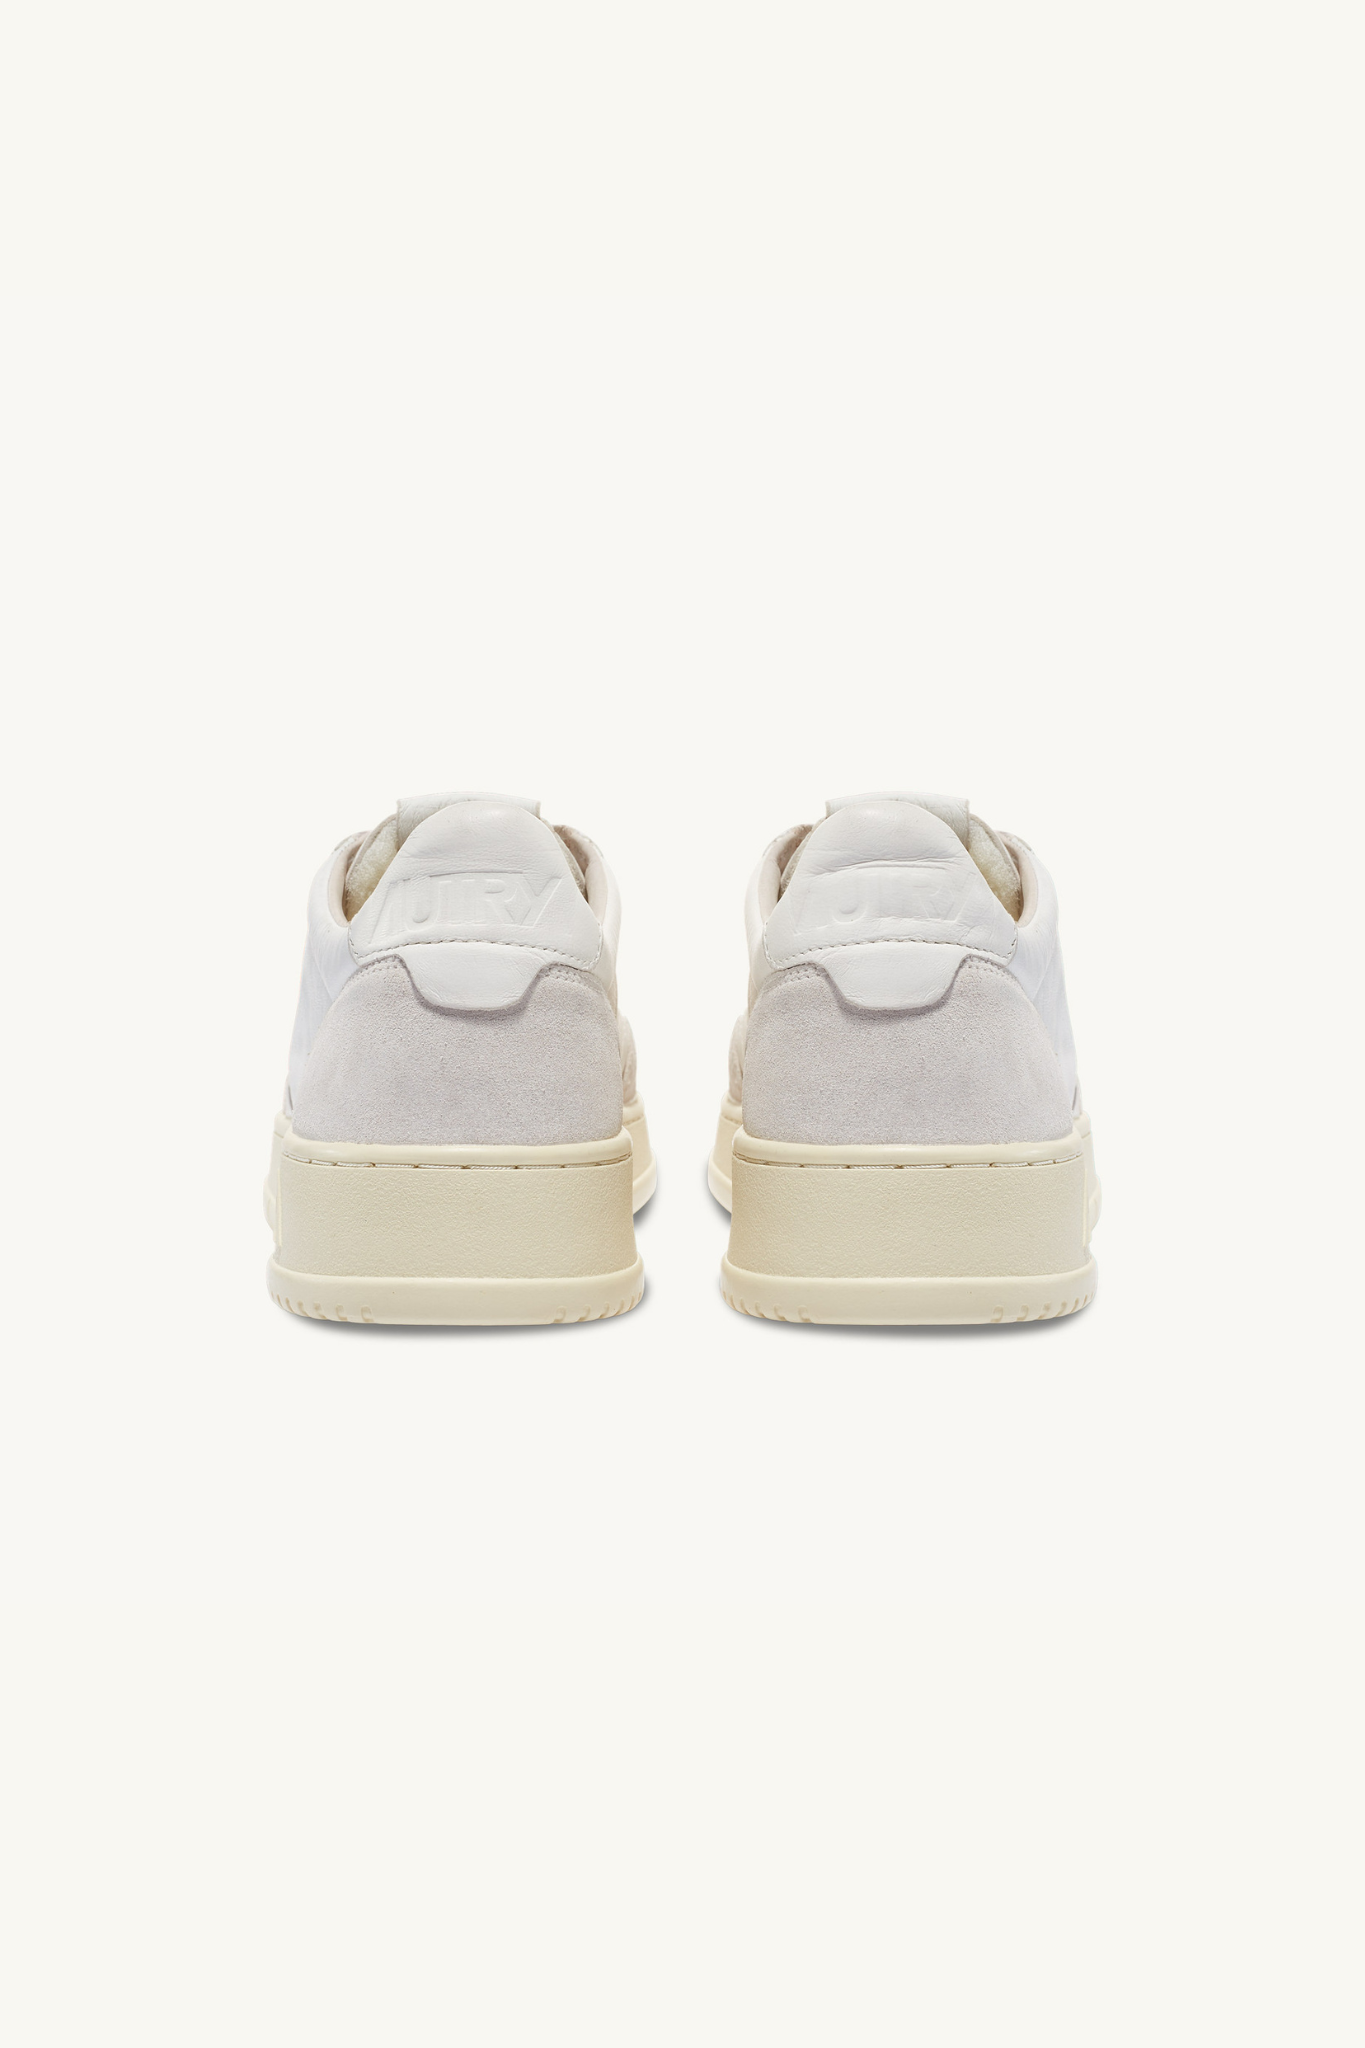 AULM-GS30 - MEDALIST LOW SNEAKERS IN WHITE GOATSKIN AND SUEDE